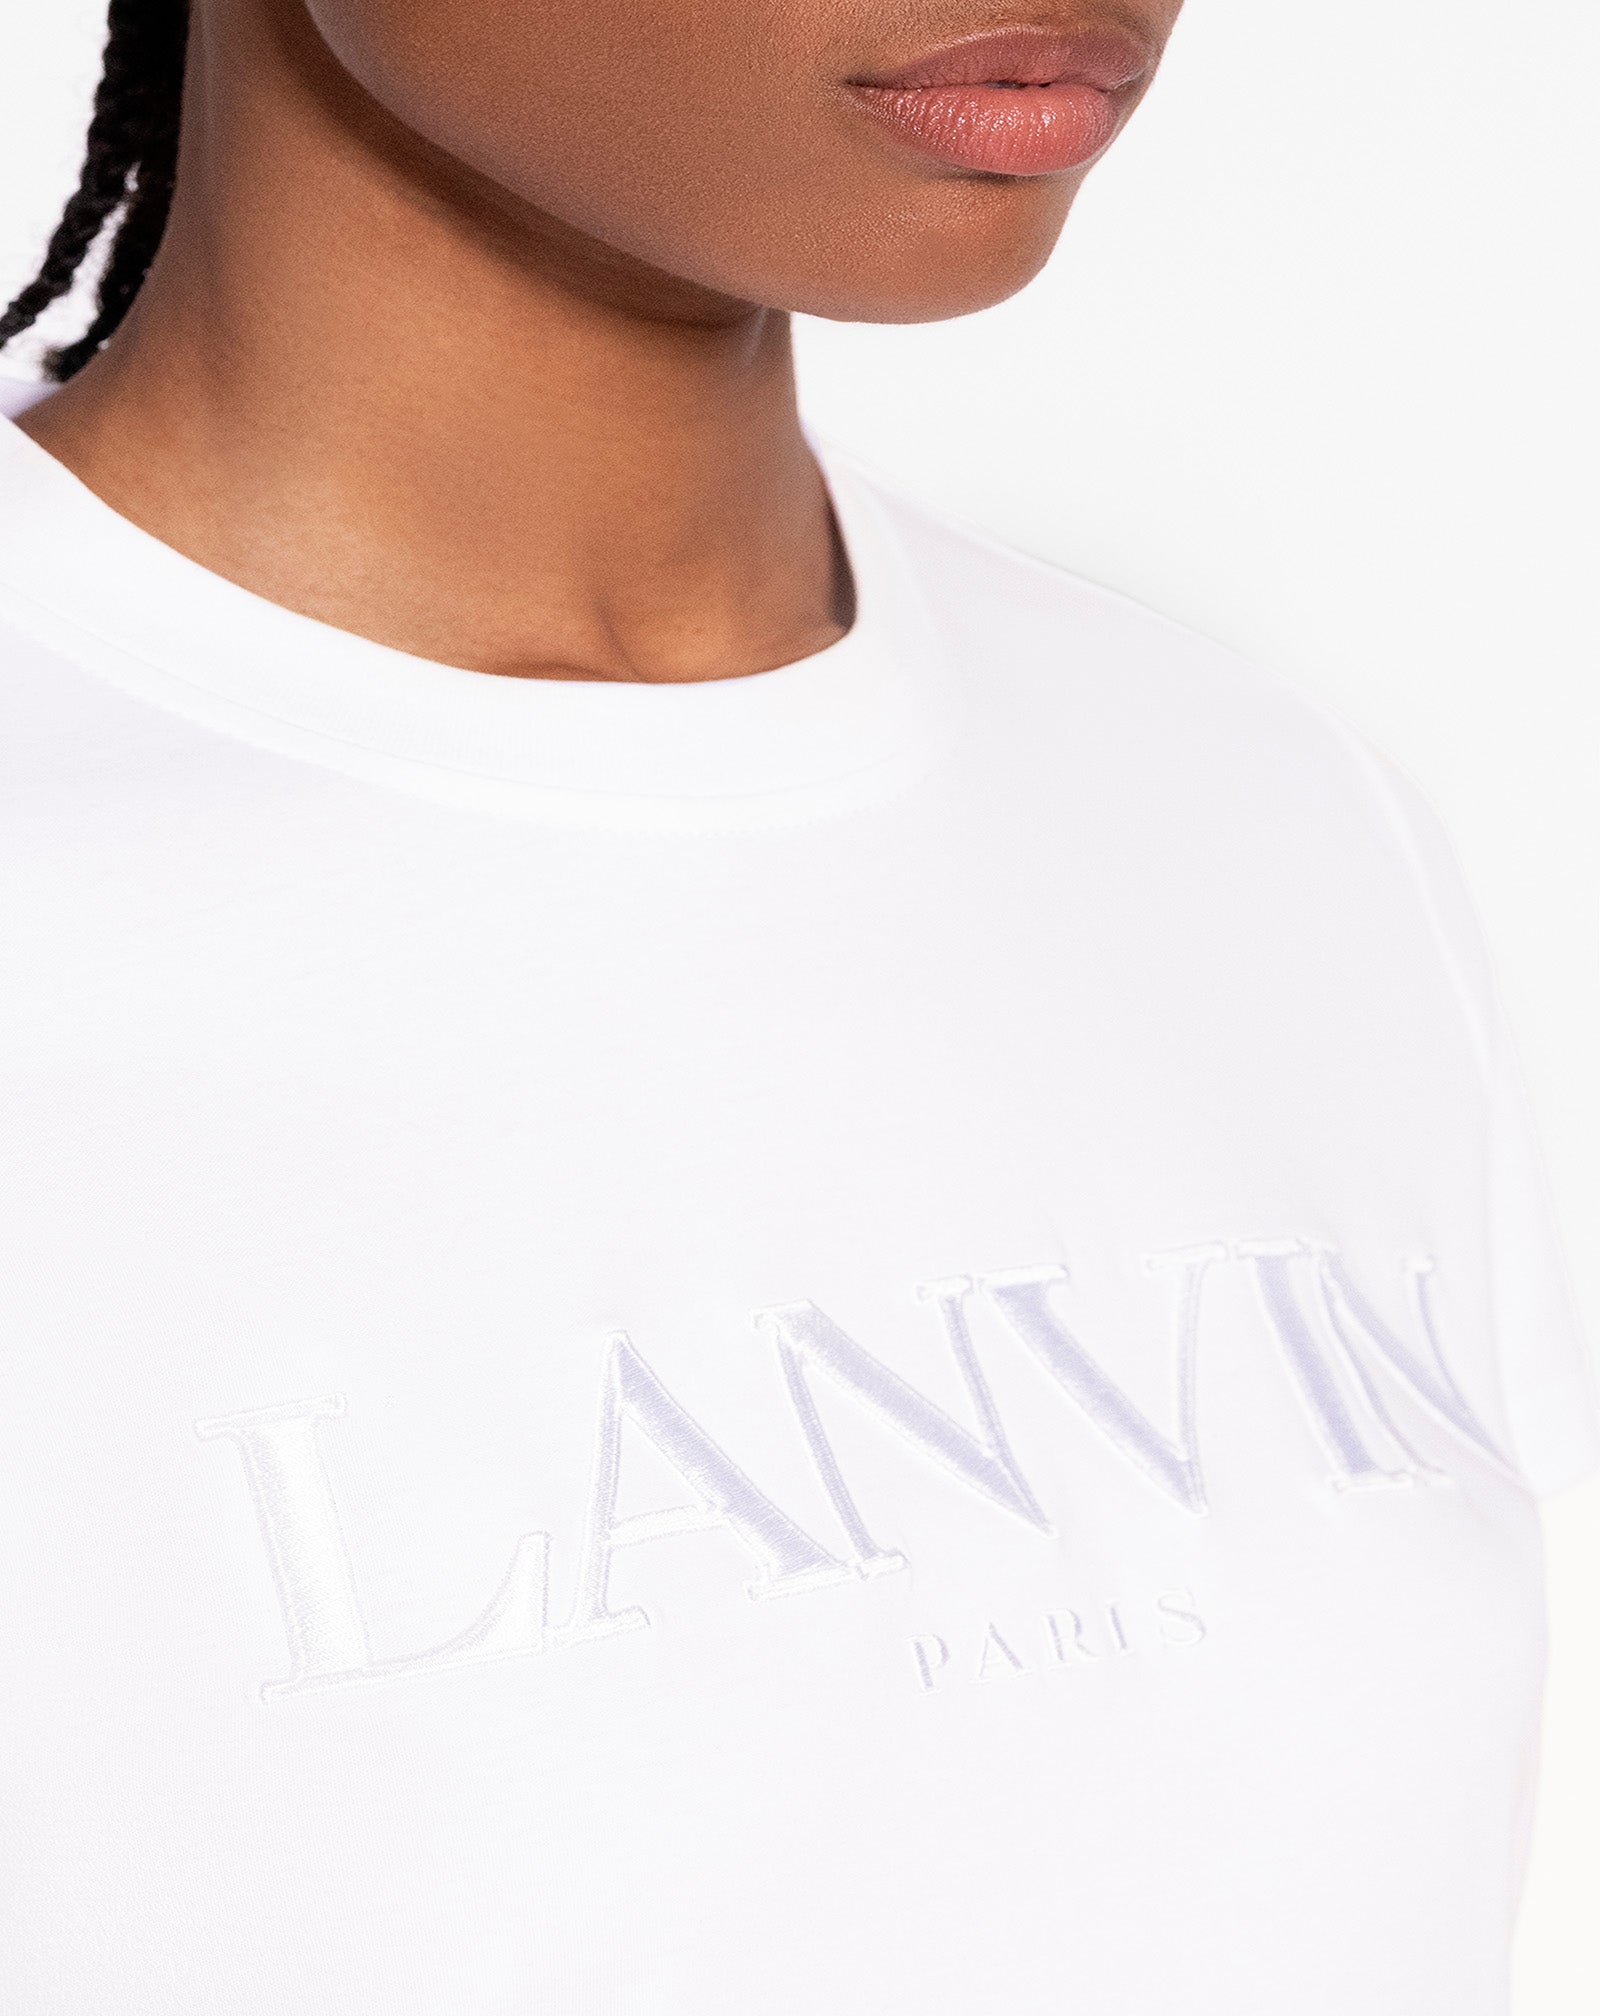 CLASSIC FIT LANVIN EMBROIDERED T-SHIRT OPTICAL WHITE | Lanvin